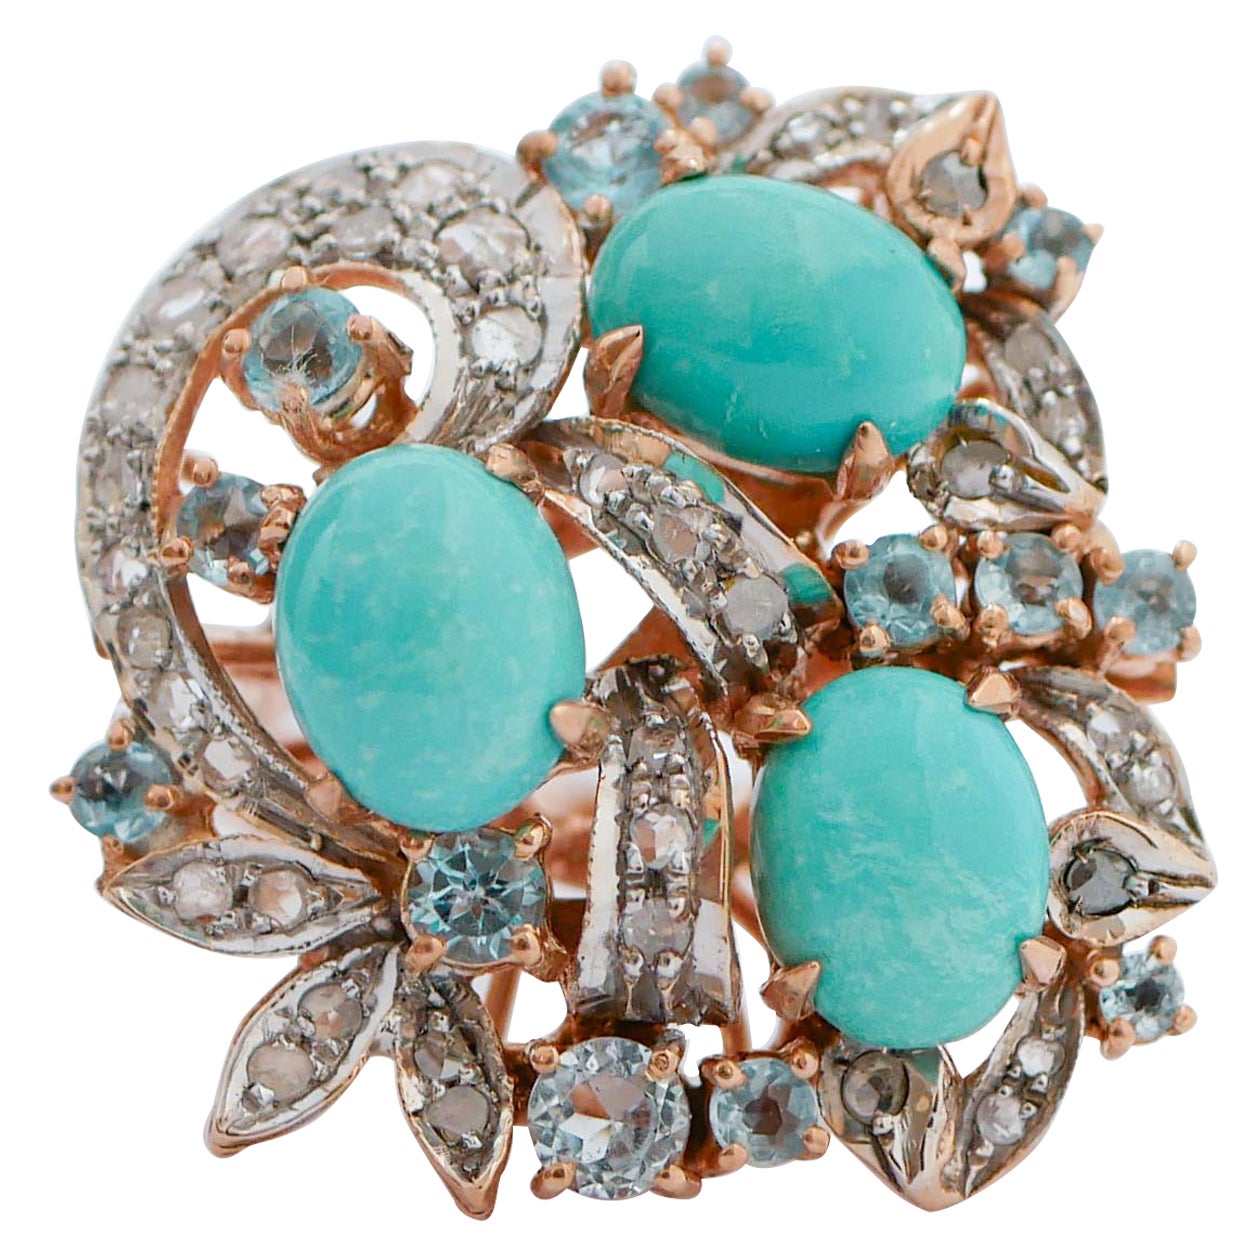 Aquamarine Colour Topazs, Turquoises, Diamonds, 14 Kt Rose Gold and Silver Ring. For Sale